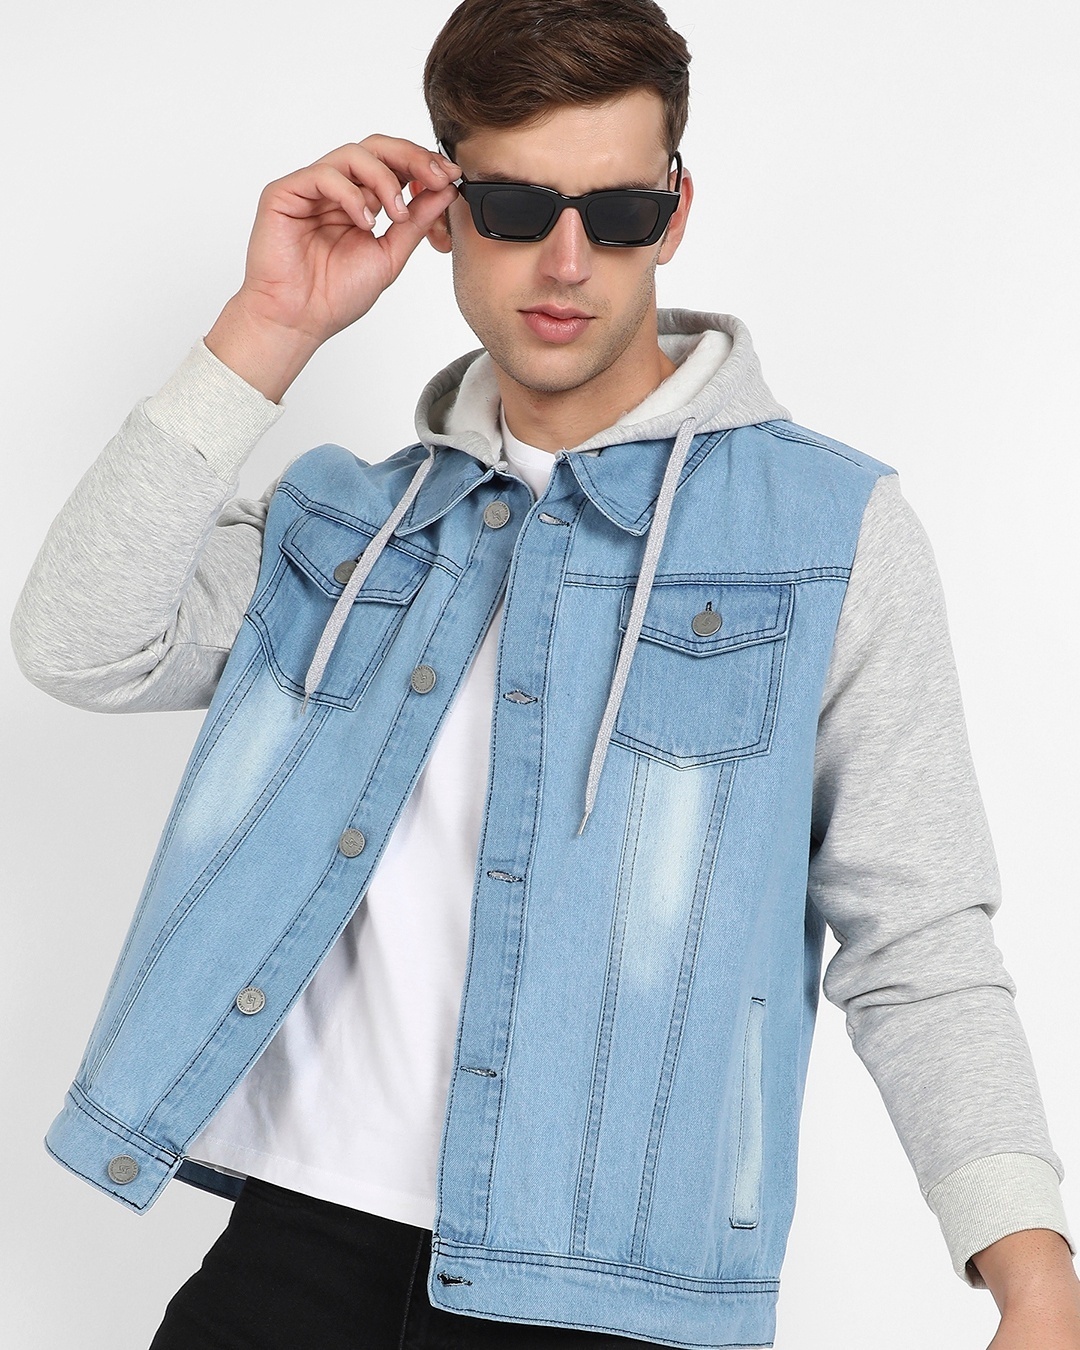 Tips For How To Wear A Denim Jacket With Jeans: Style Guide